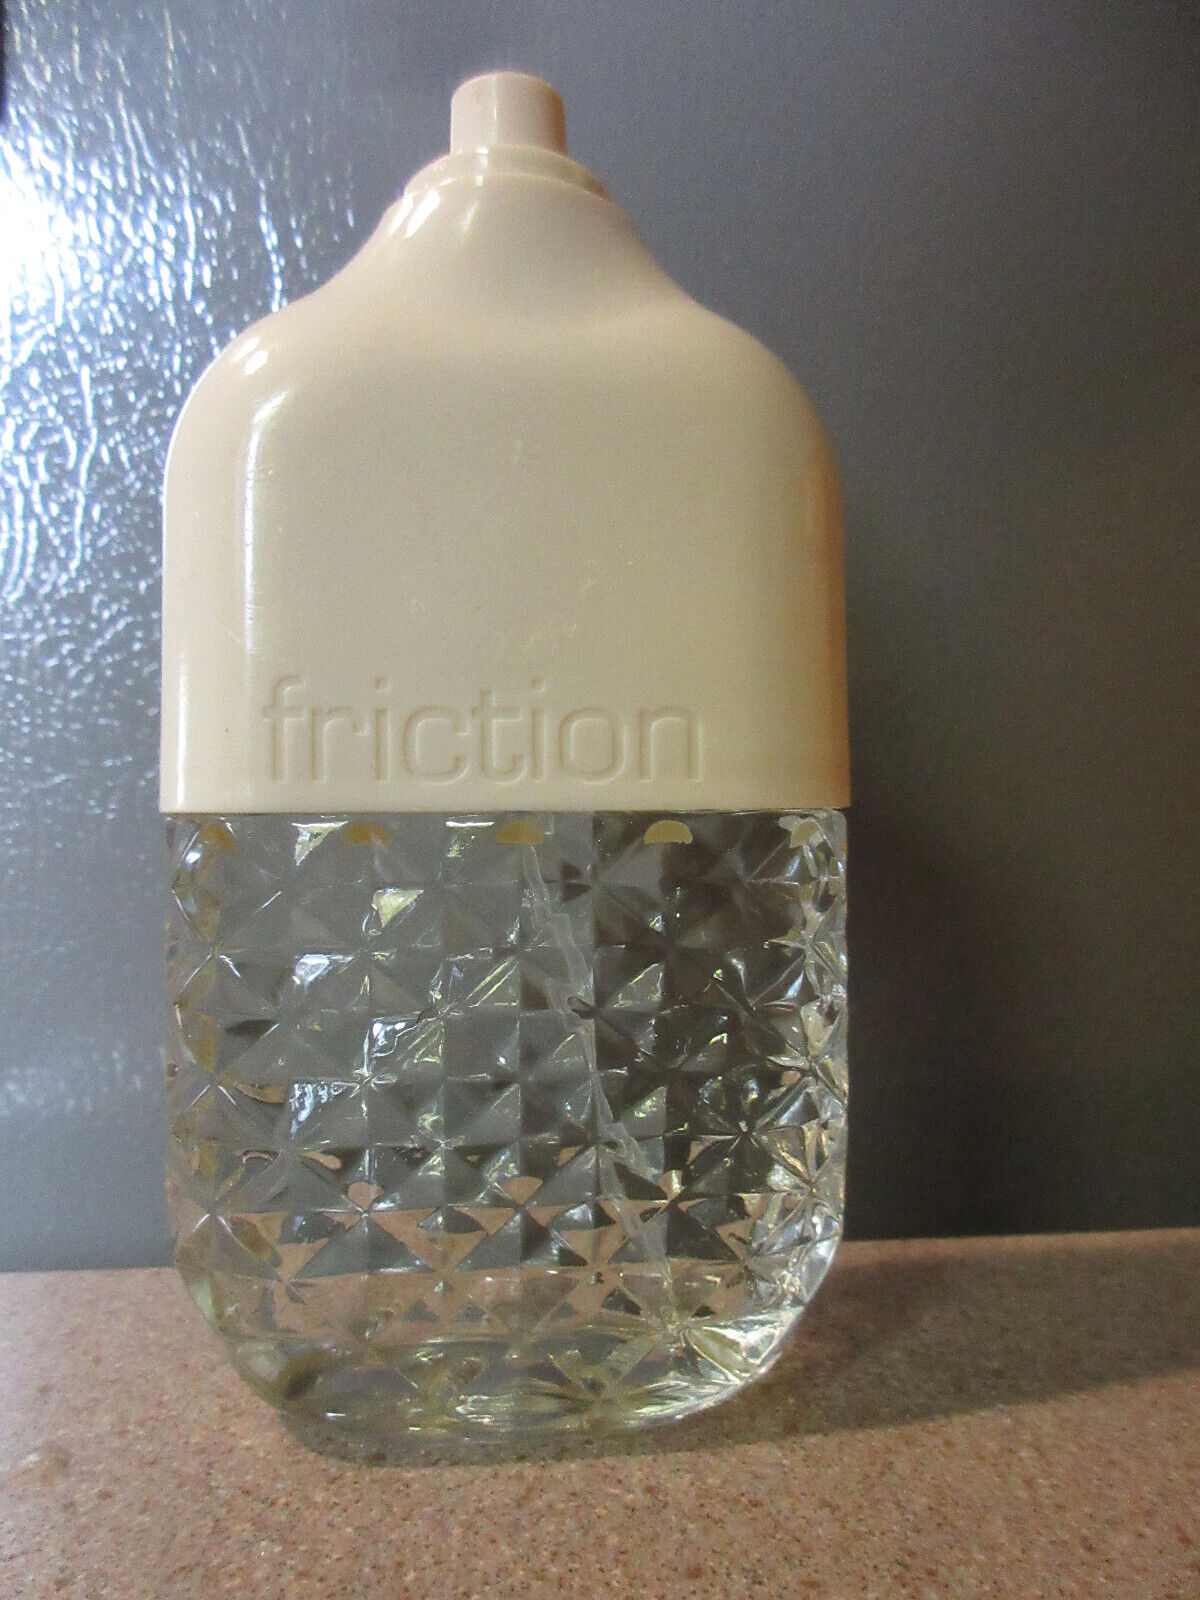 Fcuk Friction by French Connection Eau De Parfum Spray 3.4 oz for Women